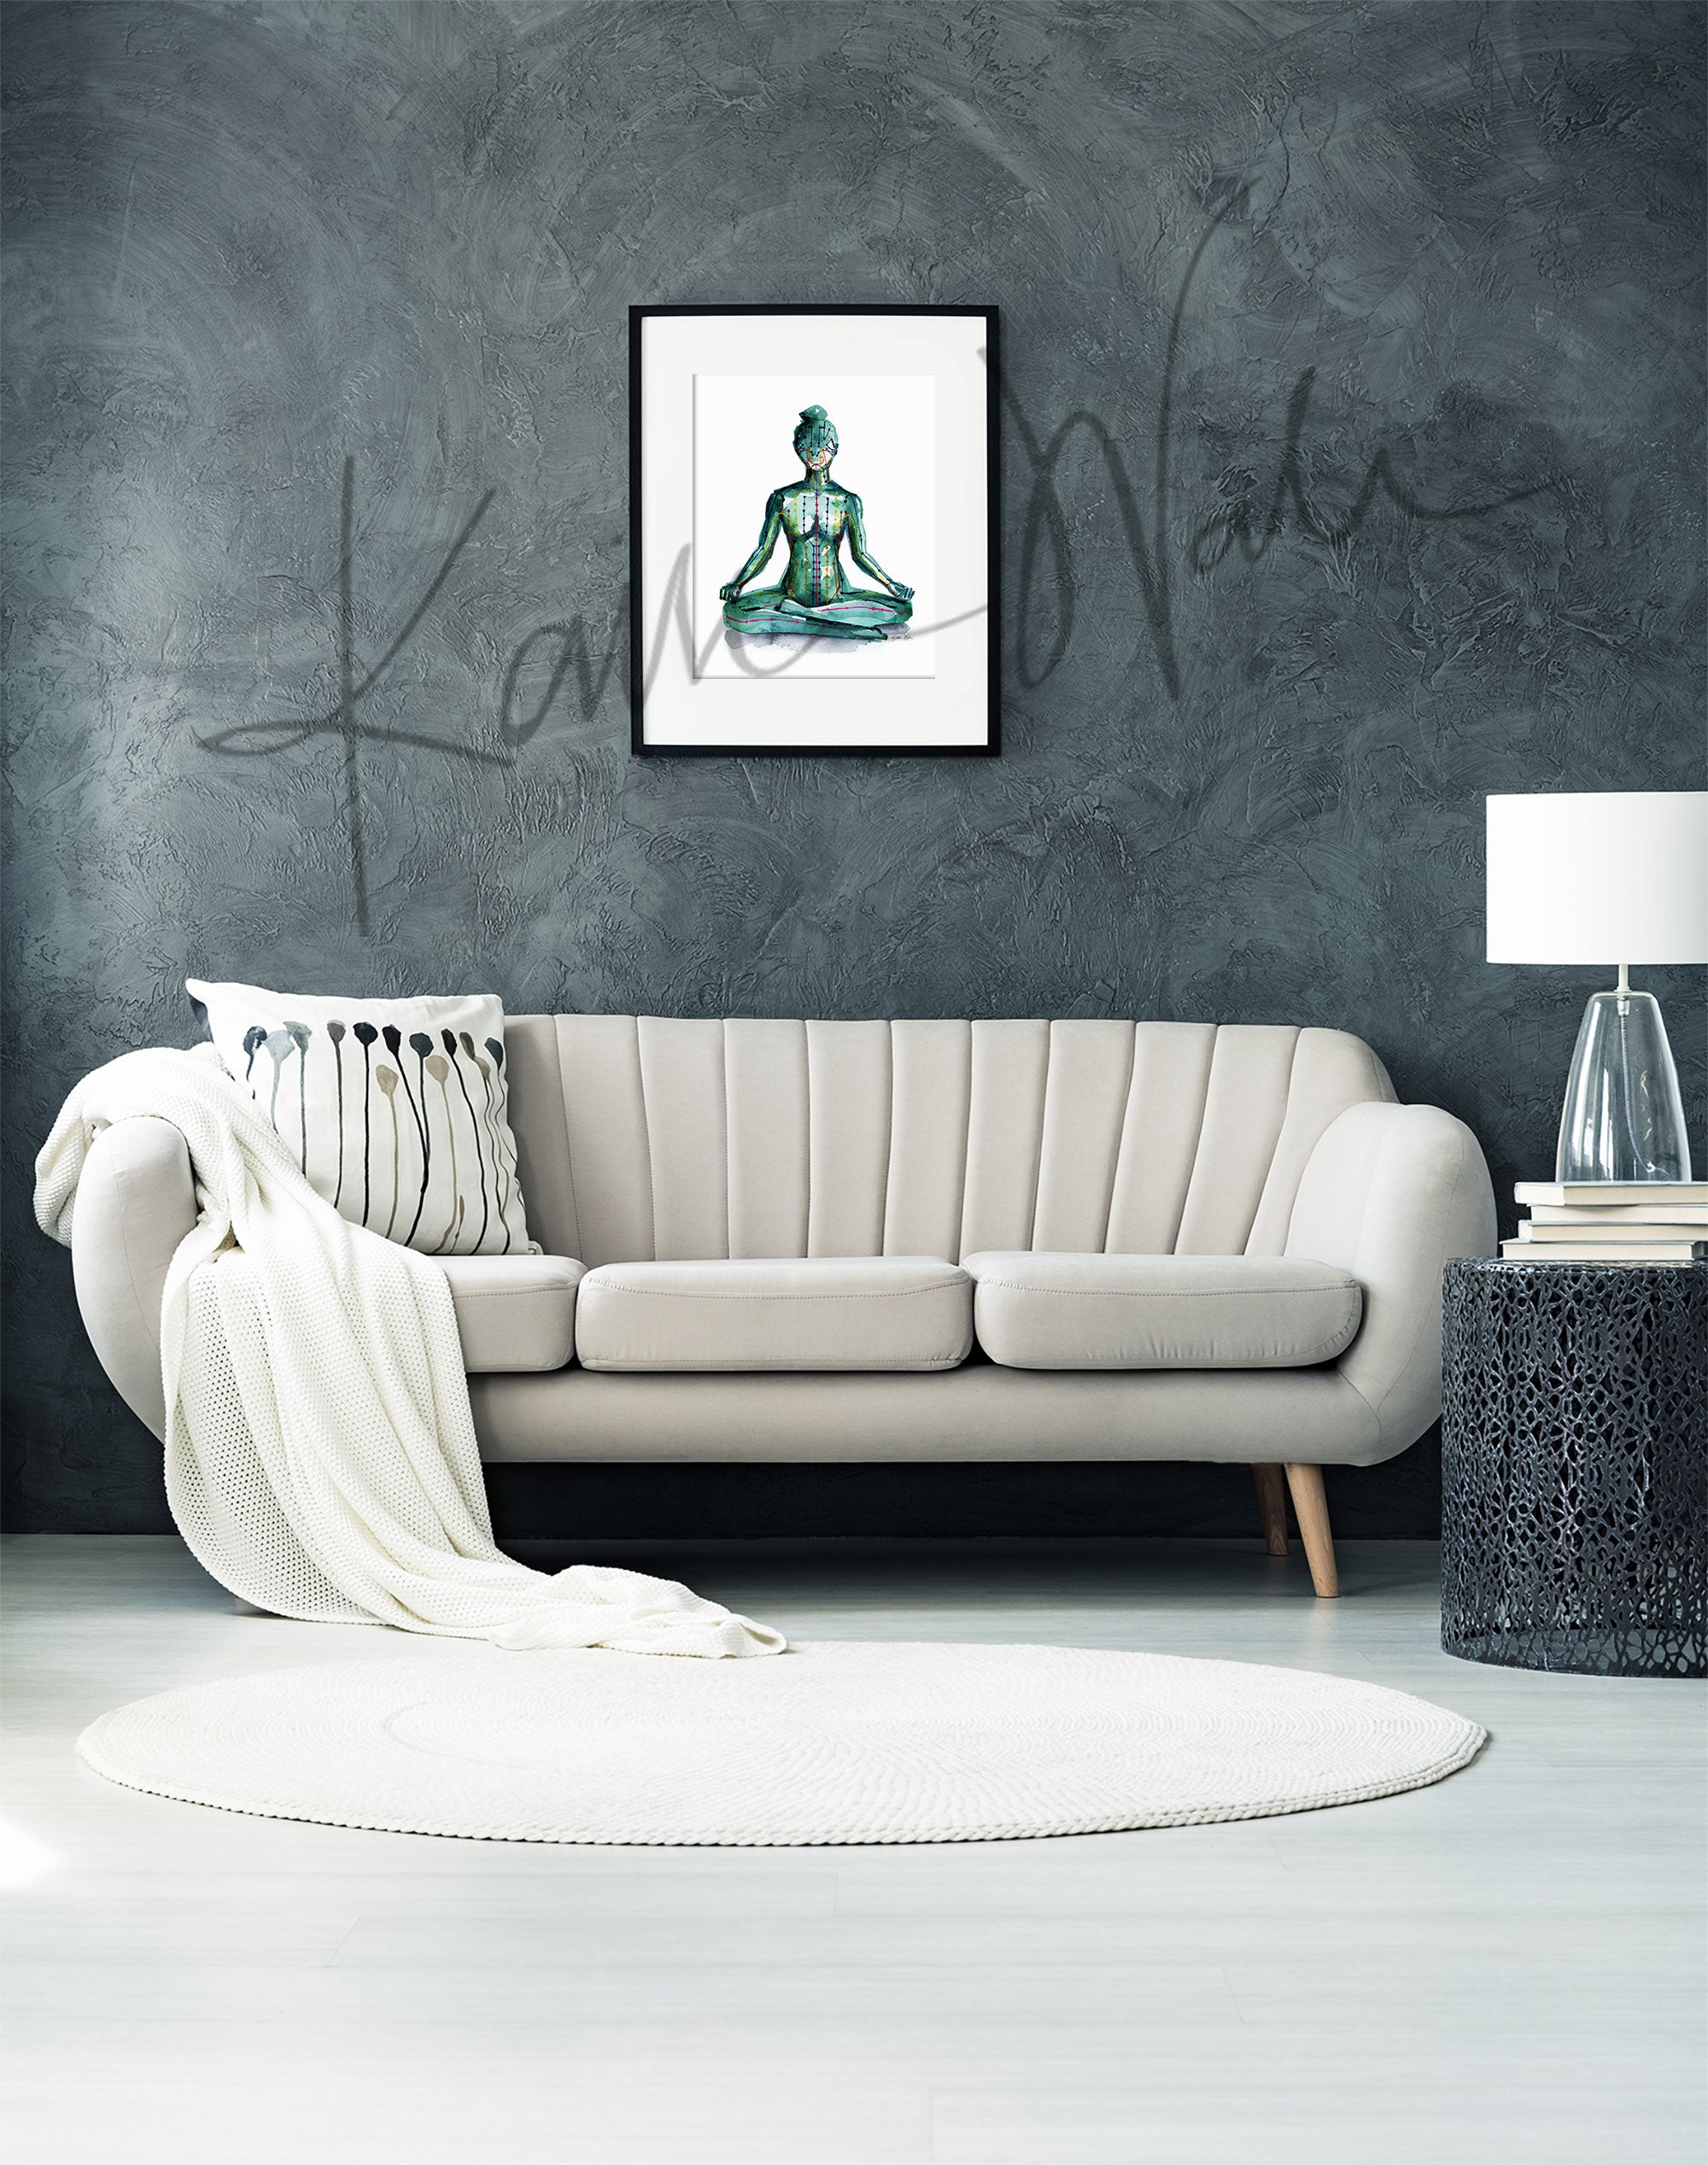 Framed watercolor painting of a person sitting in a meditative pose with meridian paths showing. The painting is hanging over a white couch.